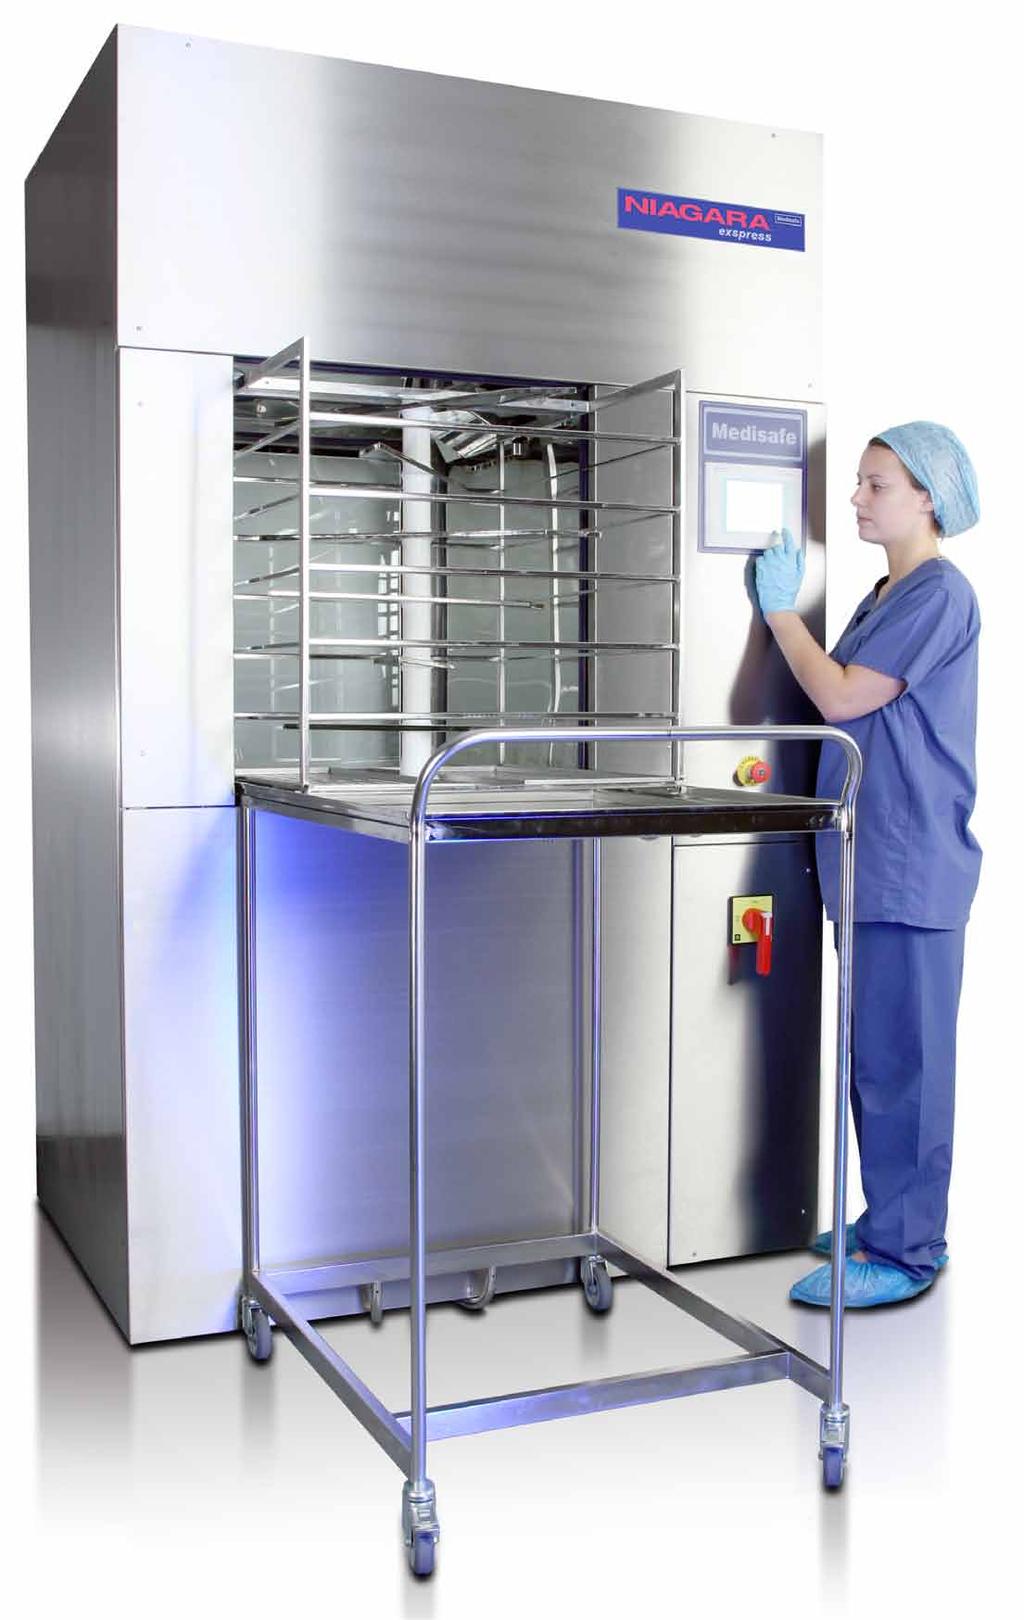 Washer Disinfector Niagara Express Large Capacity Washer Disinfector for Hospitals & Surgical Centres Niagara express is an exceptionally fast washer disinfector; achieving a <29minute cycle for the